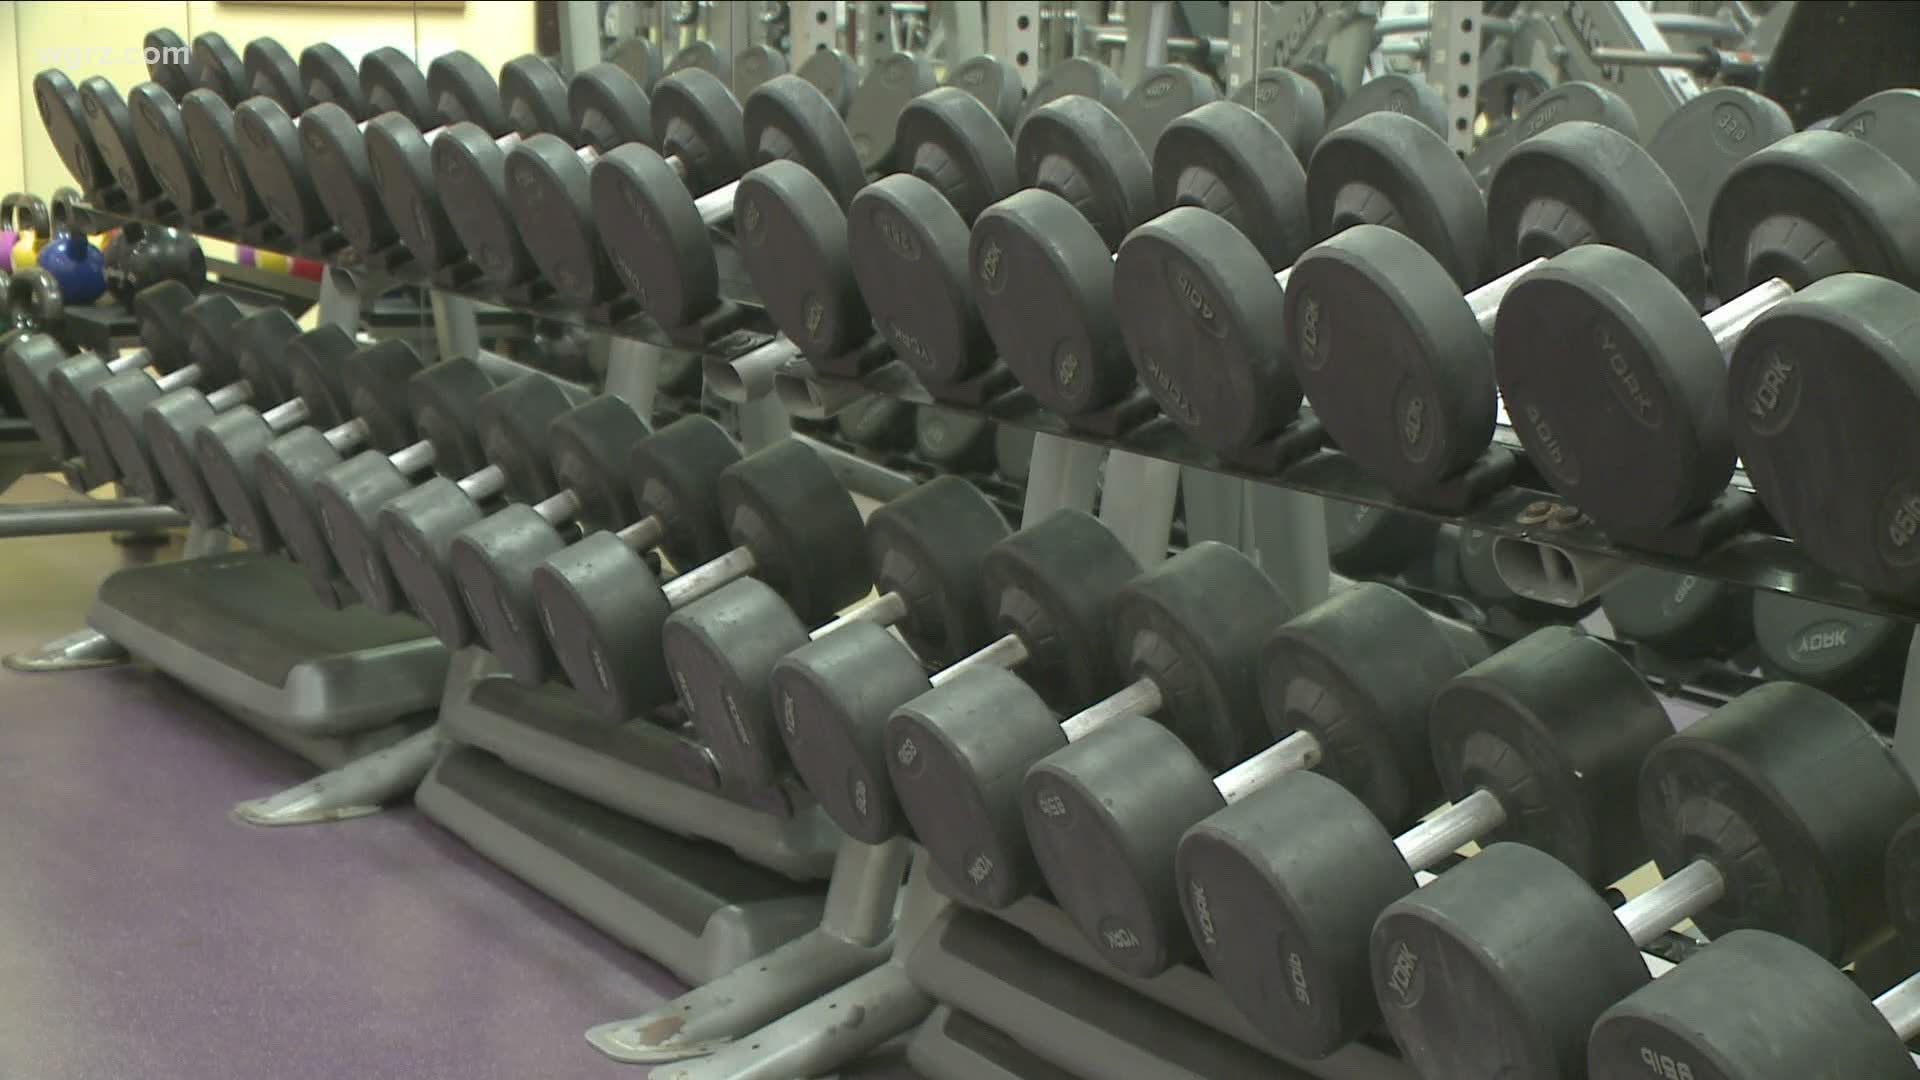 Local gyms prepare to reopen on Monday